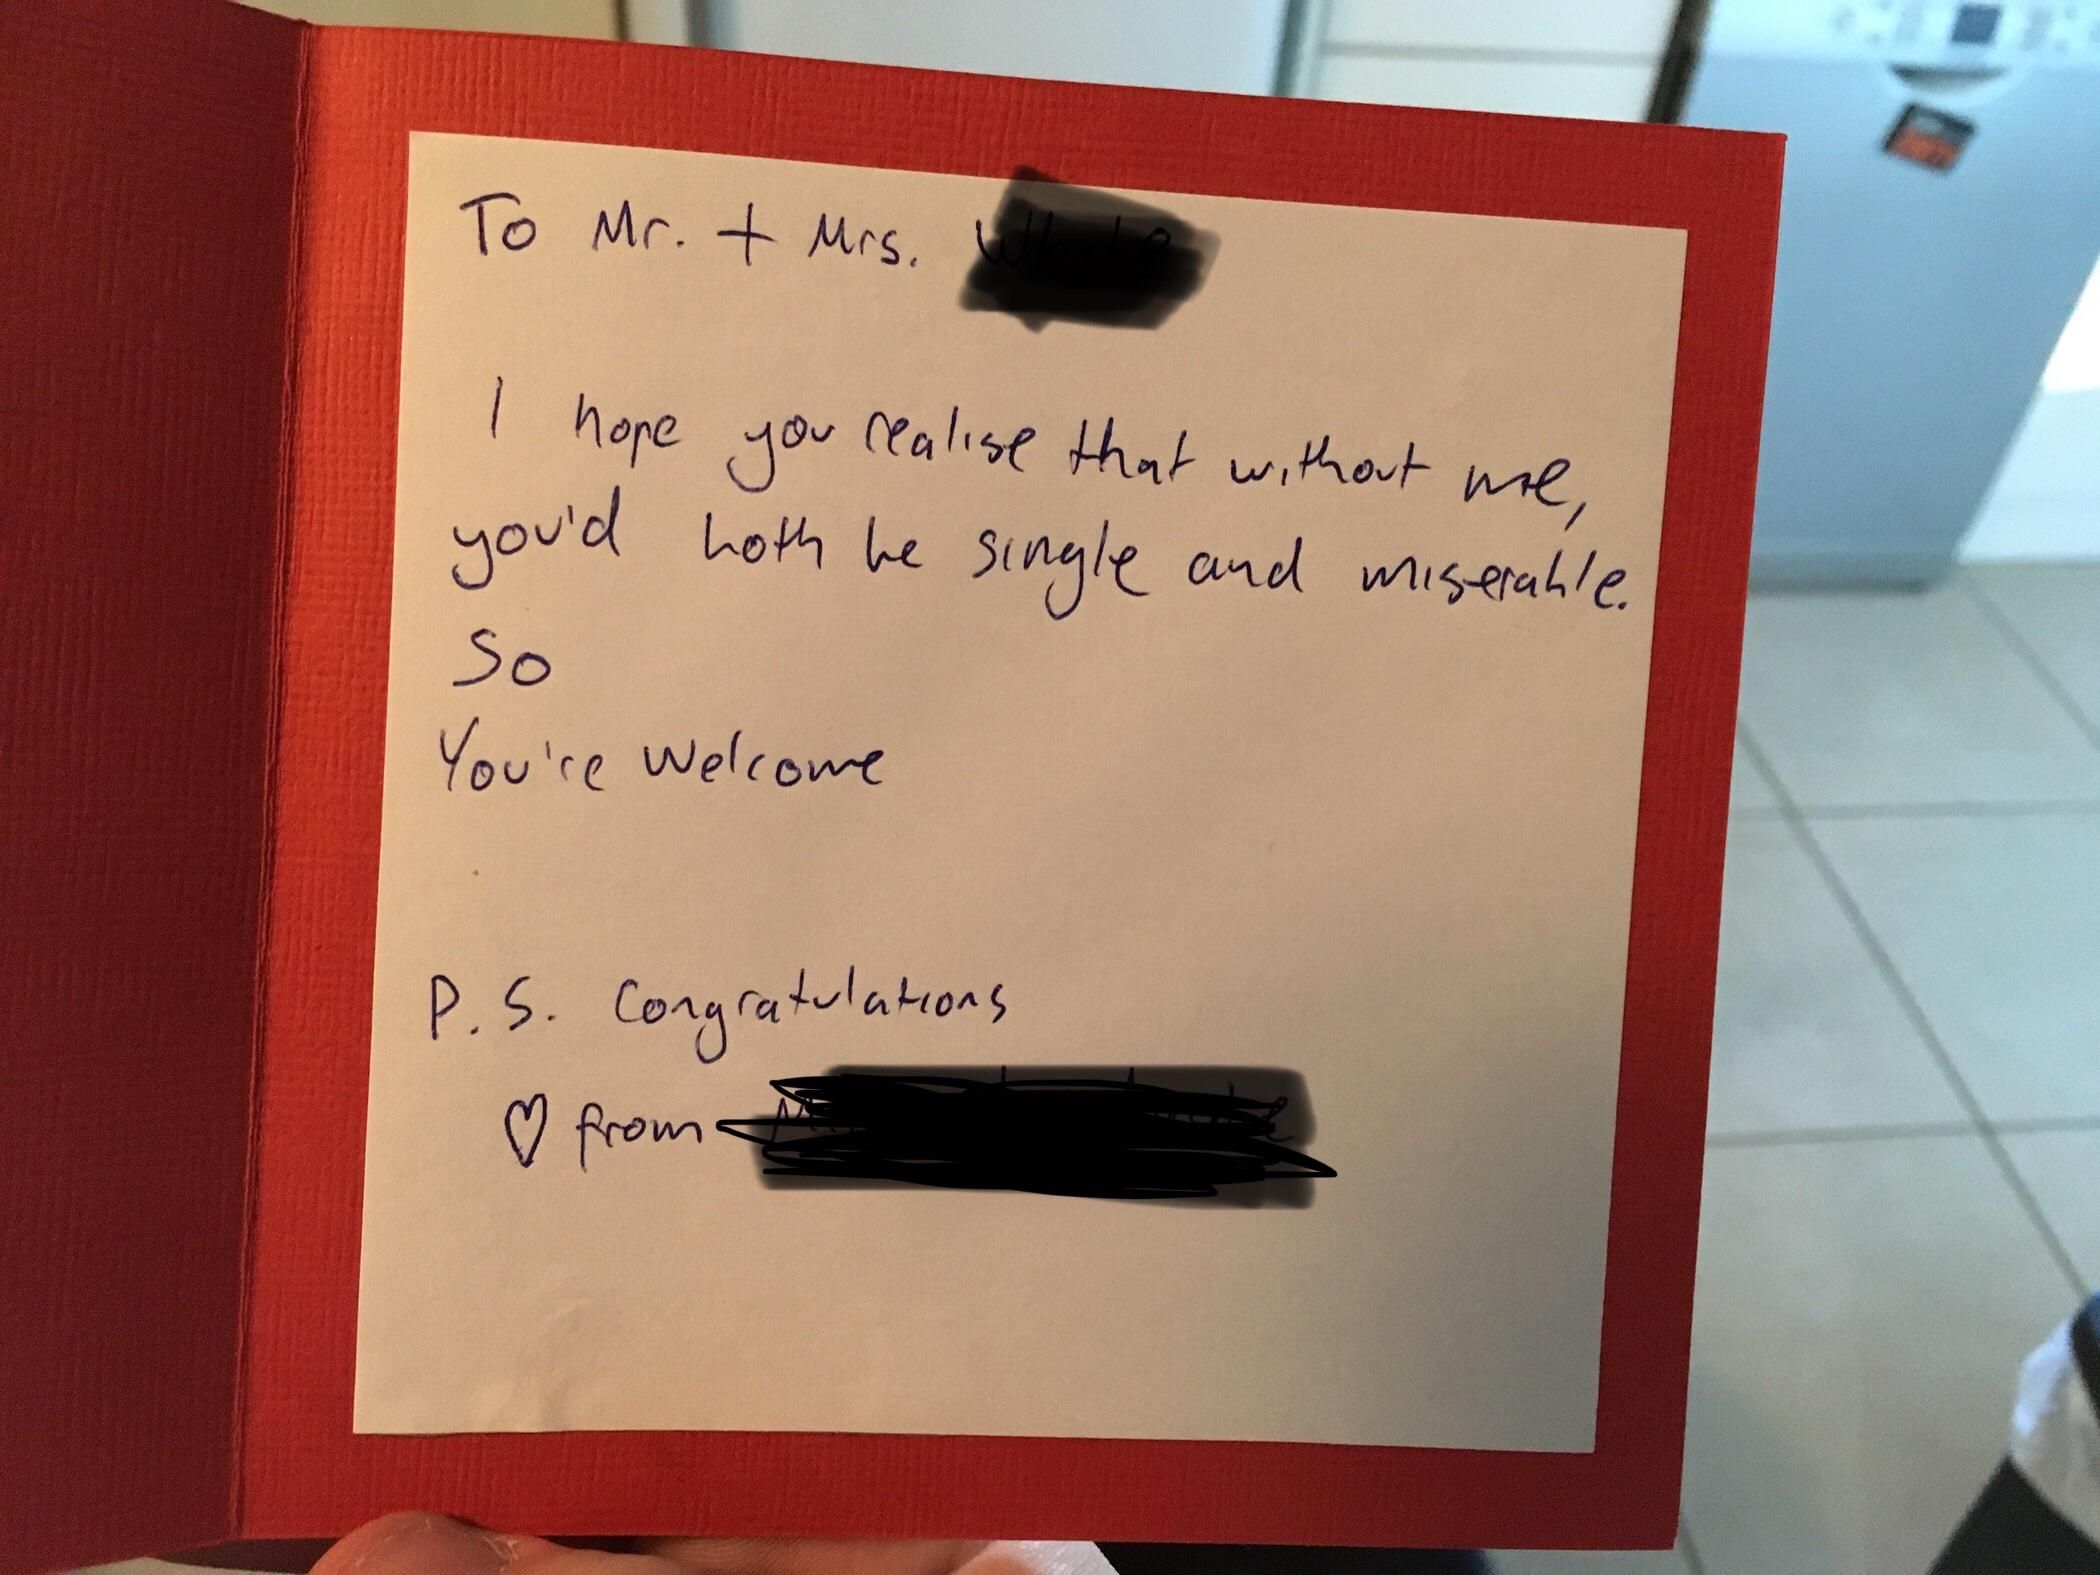 I met my wife at a mutual friend’s party and this was the card he gave to us at our wedding.